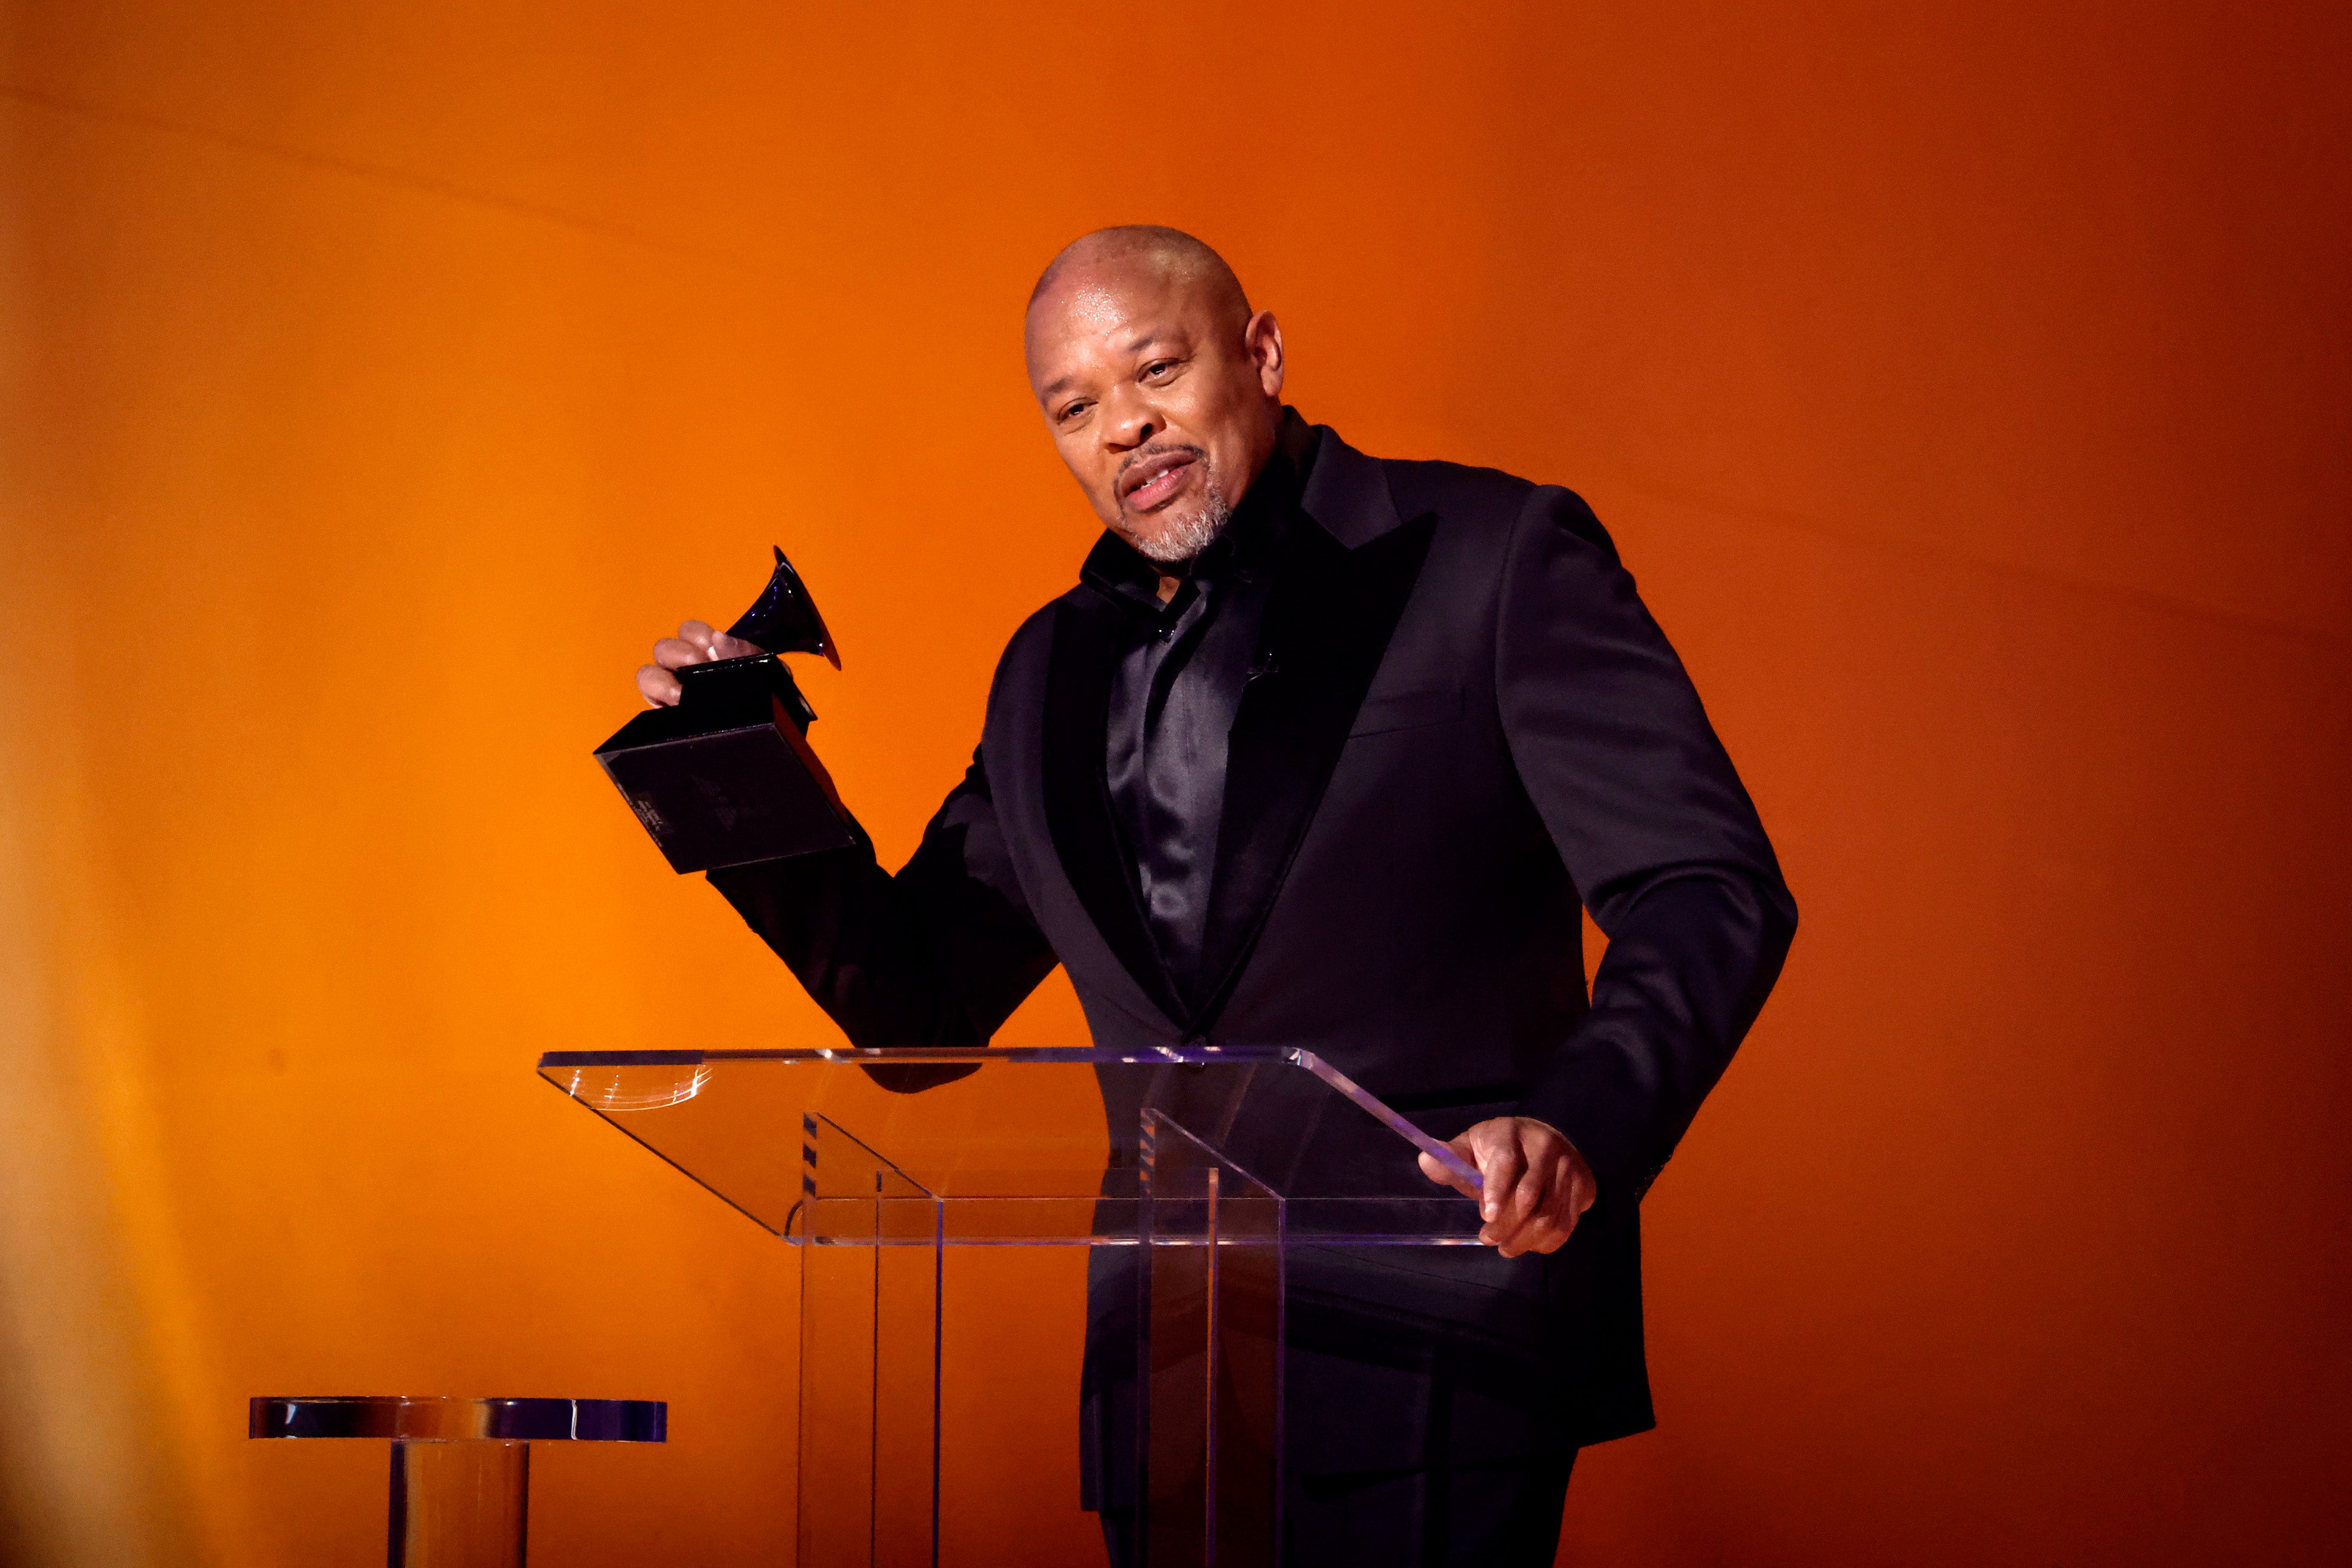 Dr. Dre accepts the Dr. Dre Global Impact Award onstage during the 65th GRAMMY Awards